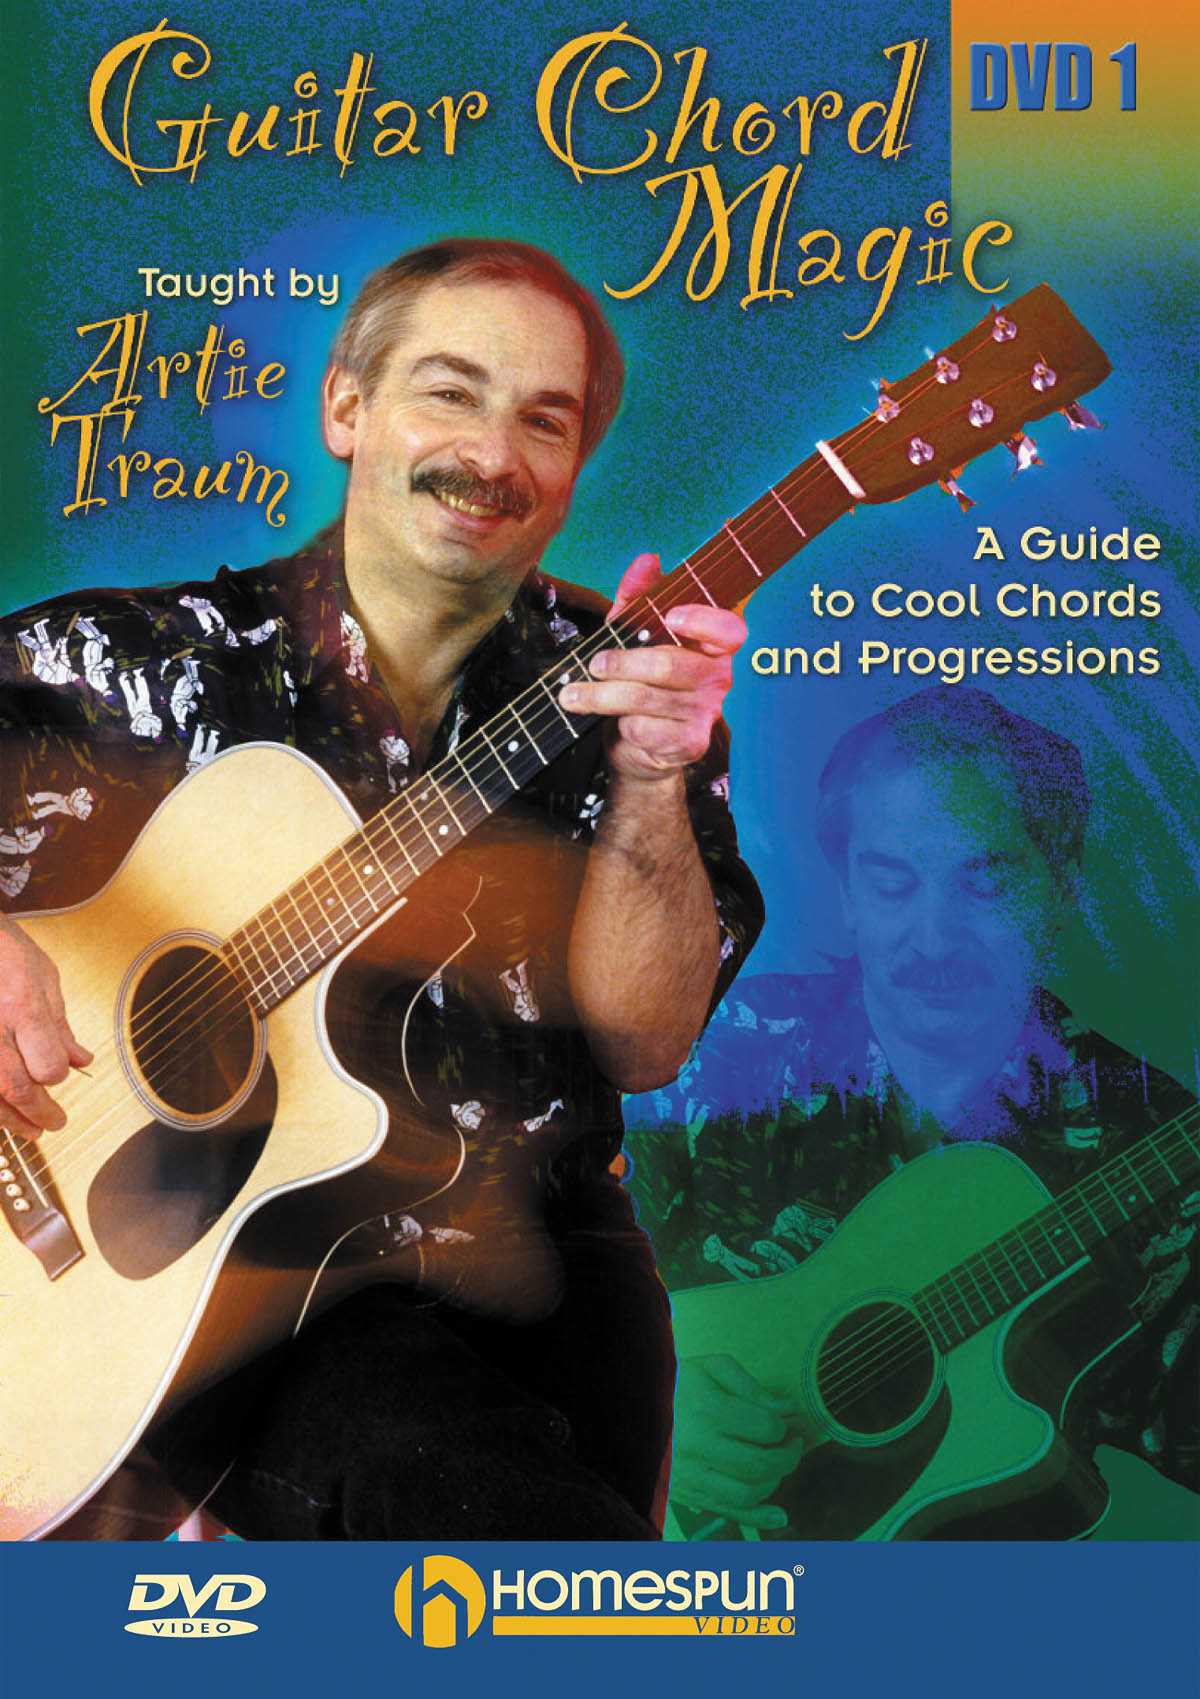 Image 1 of DVD - Guitar Chord Magic: Vol. 1-A Guide to Cool Chords and Progressions - SKU# 300-DVD230 : Product Type Media : Elderly Instruments